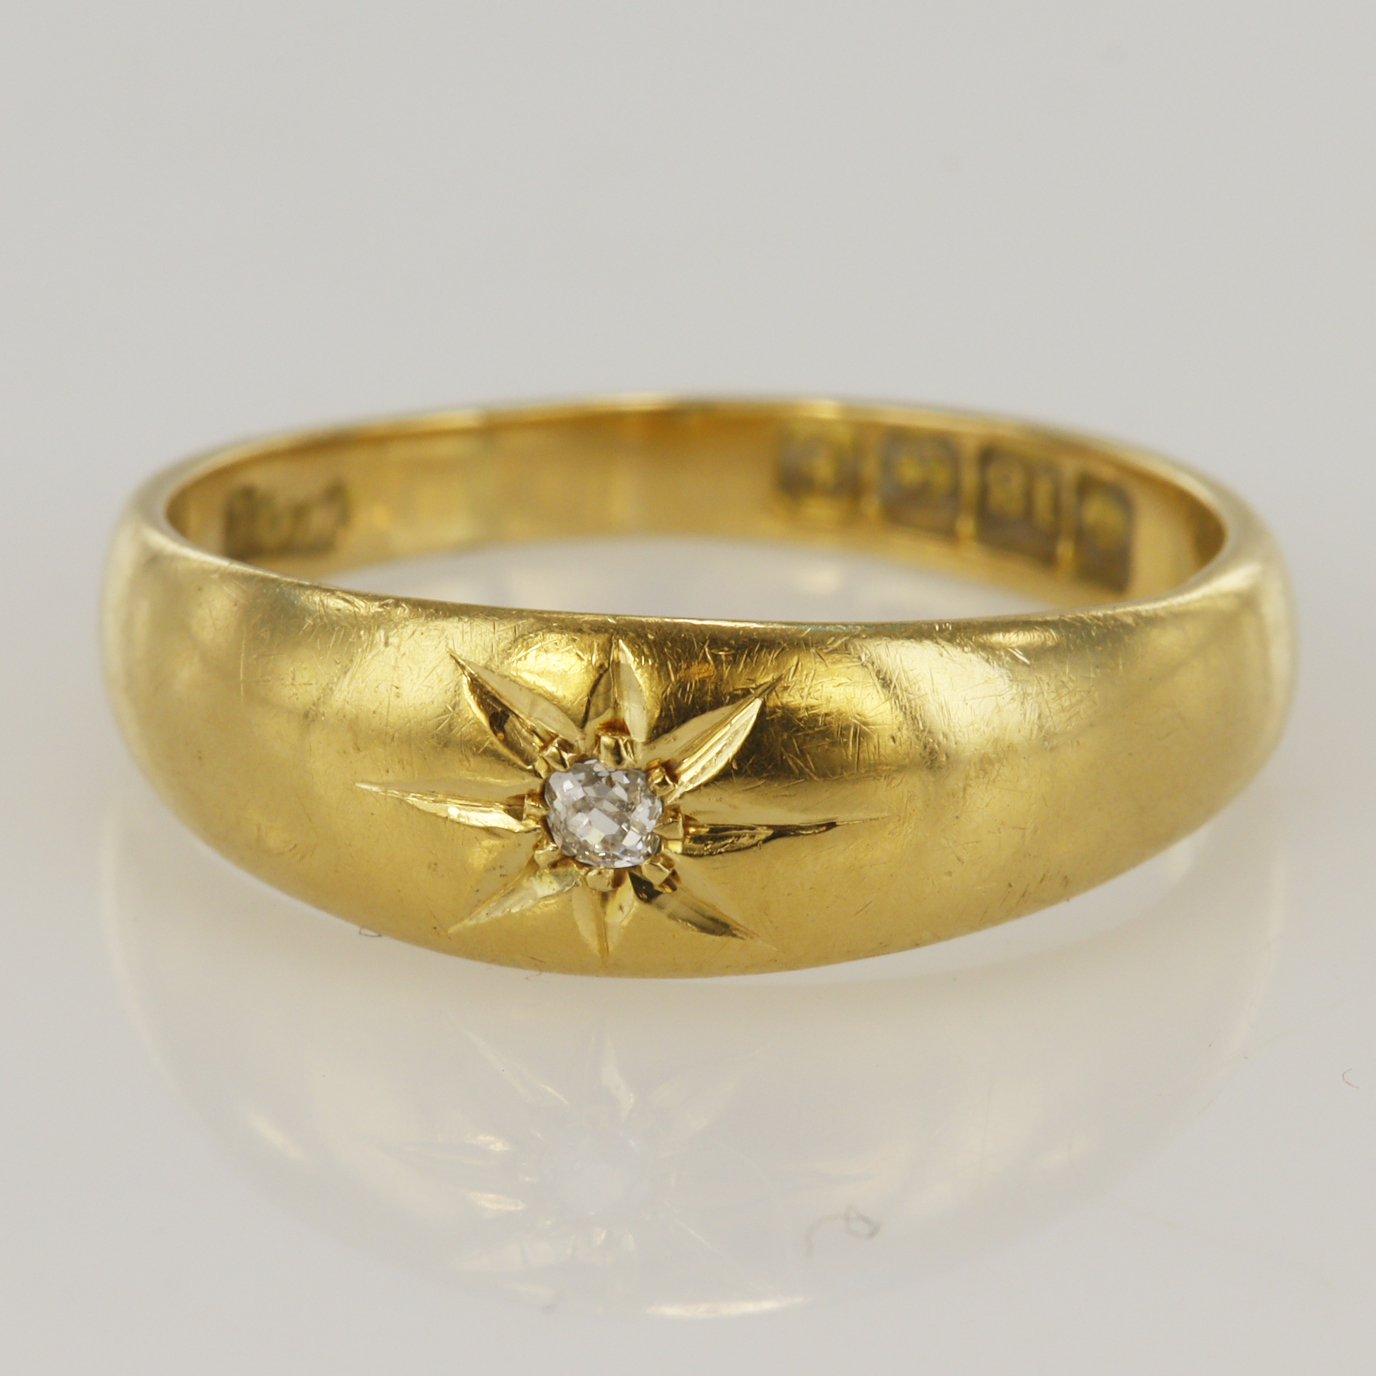 18ct yellow gold antique diamond gypsy ring, one star set old cut diamond approx. 0.02ct, head width